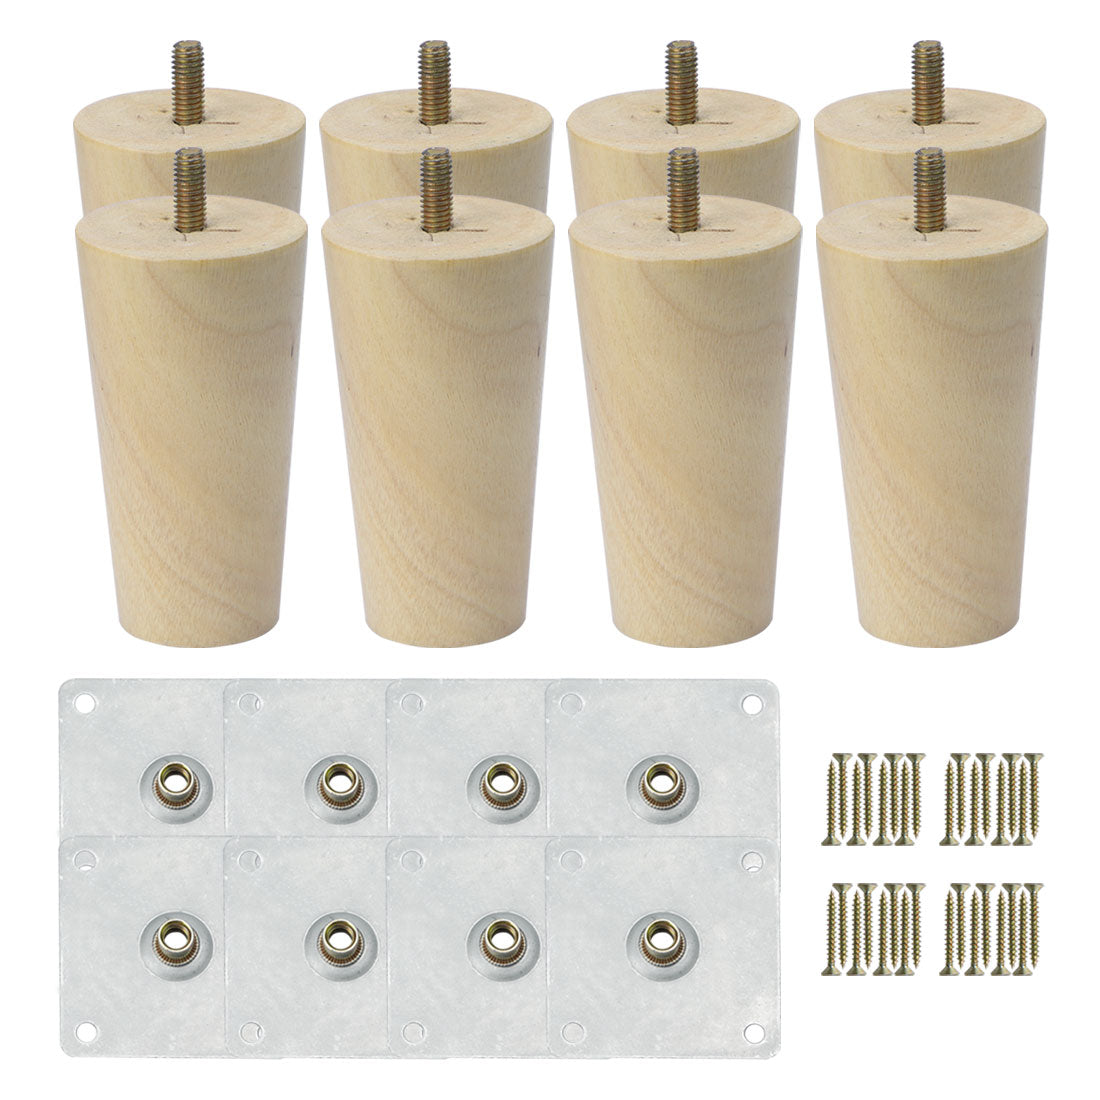 uxcell Uxcell 5" Round Solid Wood Furniture Leg Table Chair Feet Adjuster Replacement Set of 8